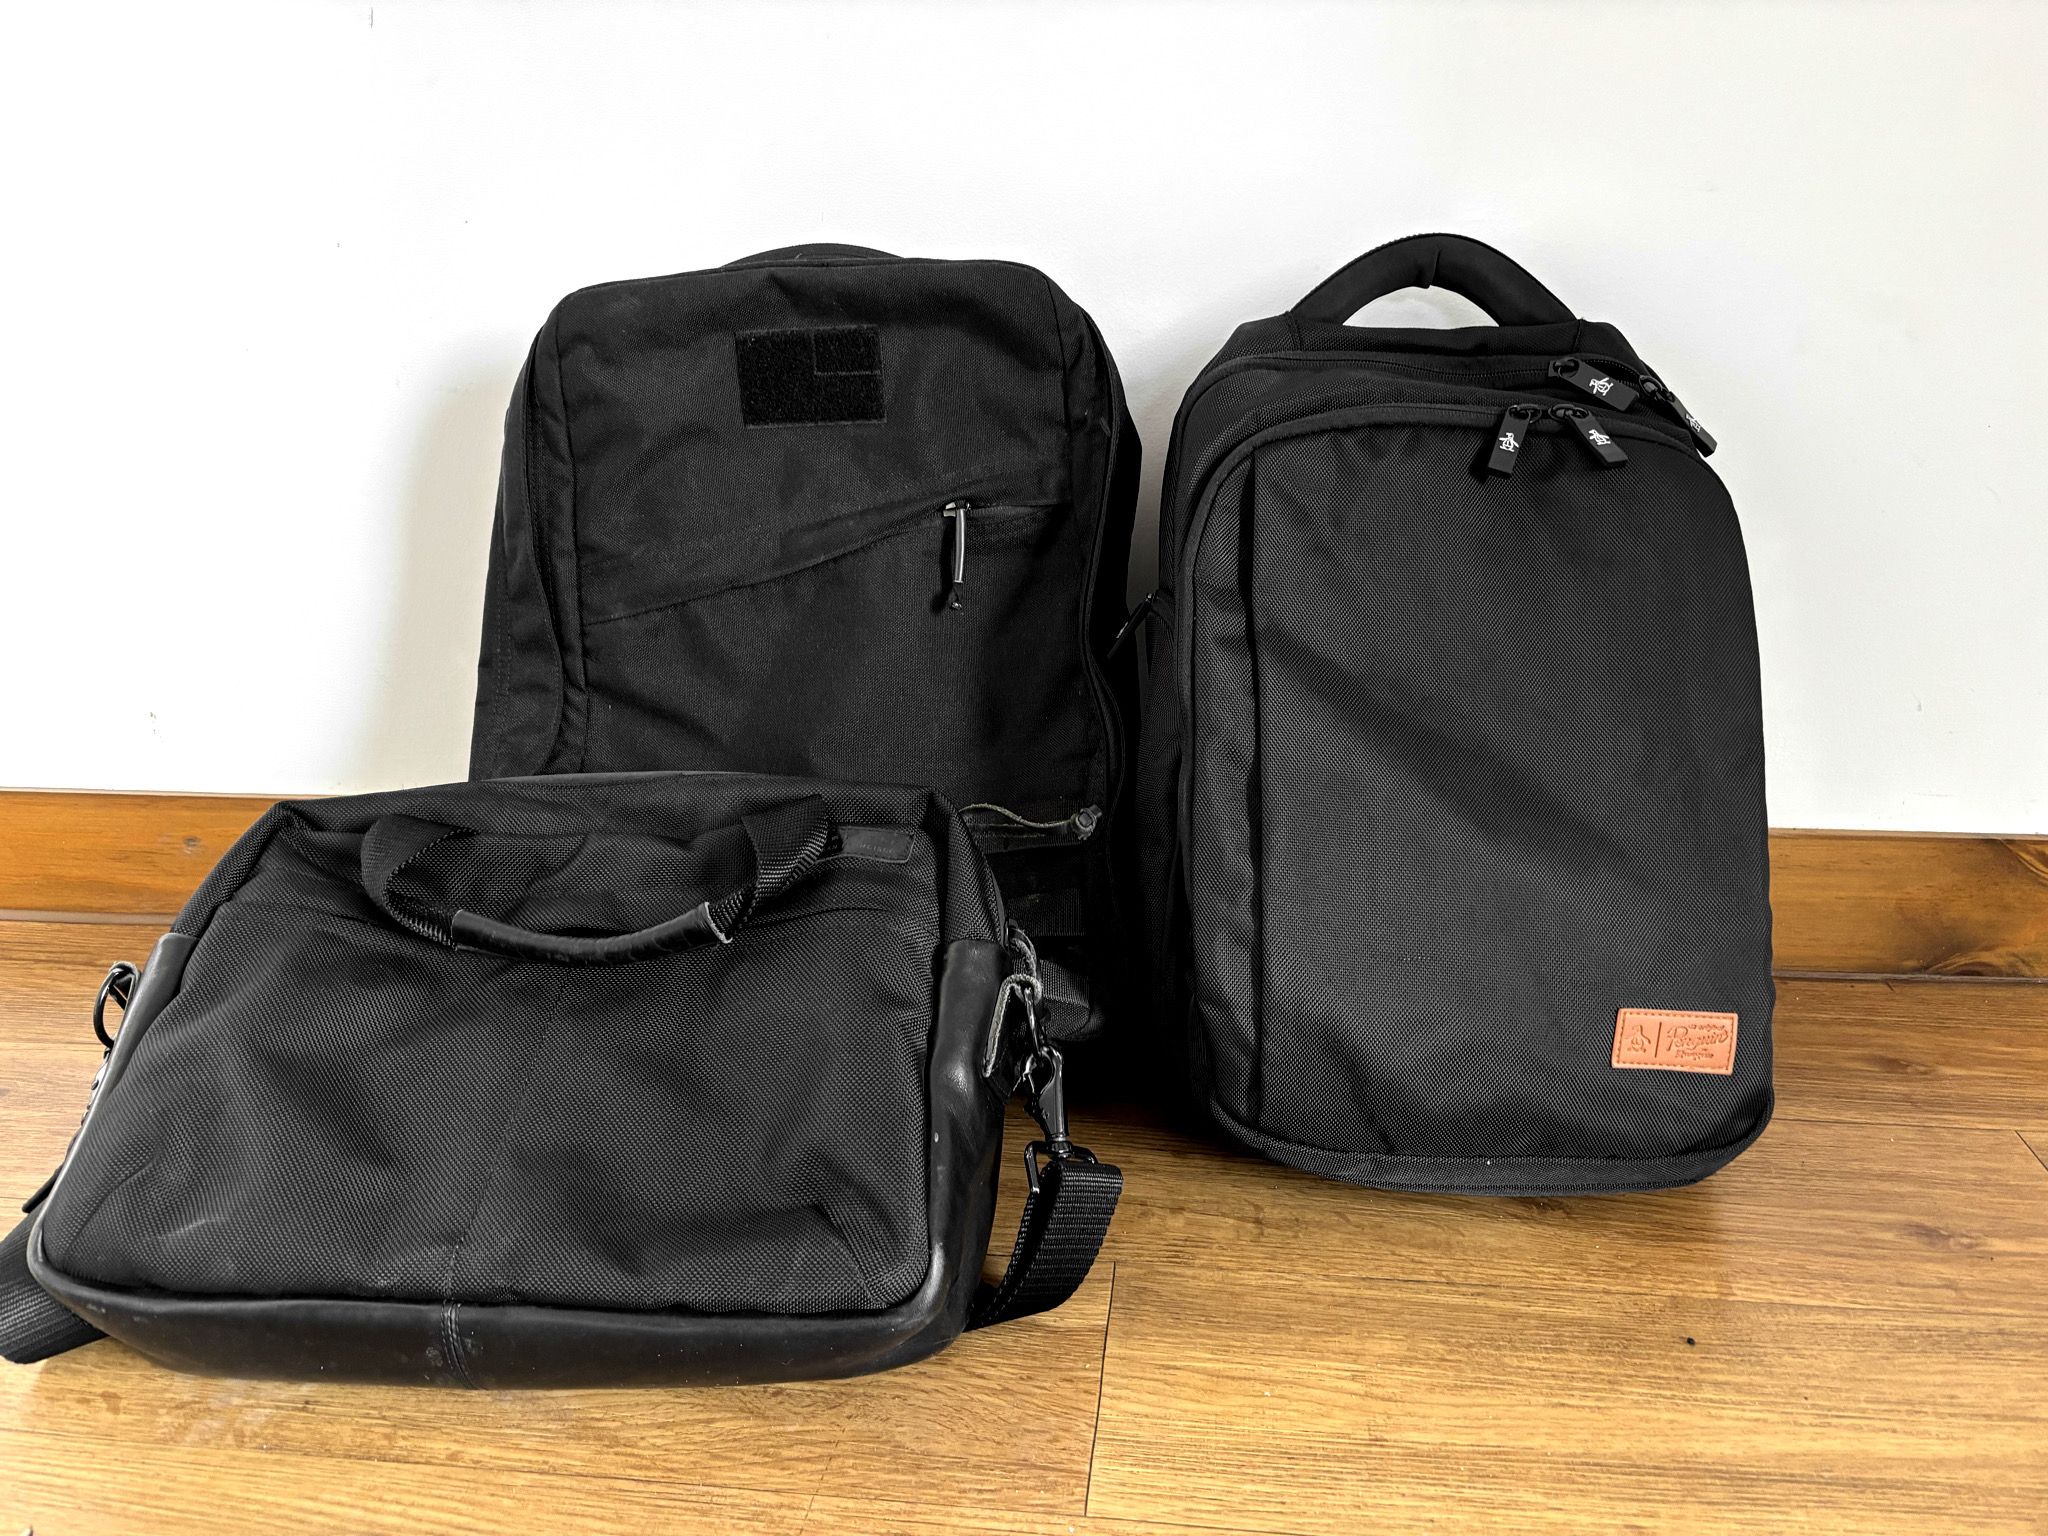 My current backpacks